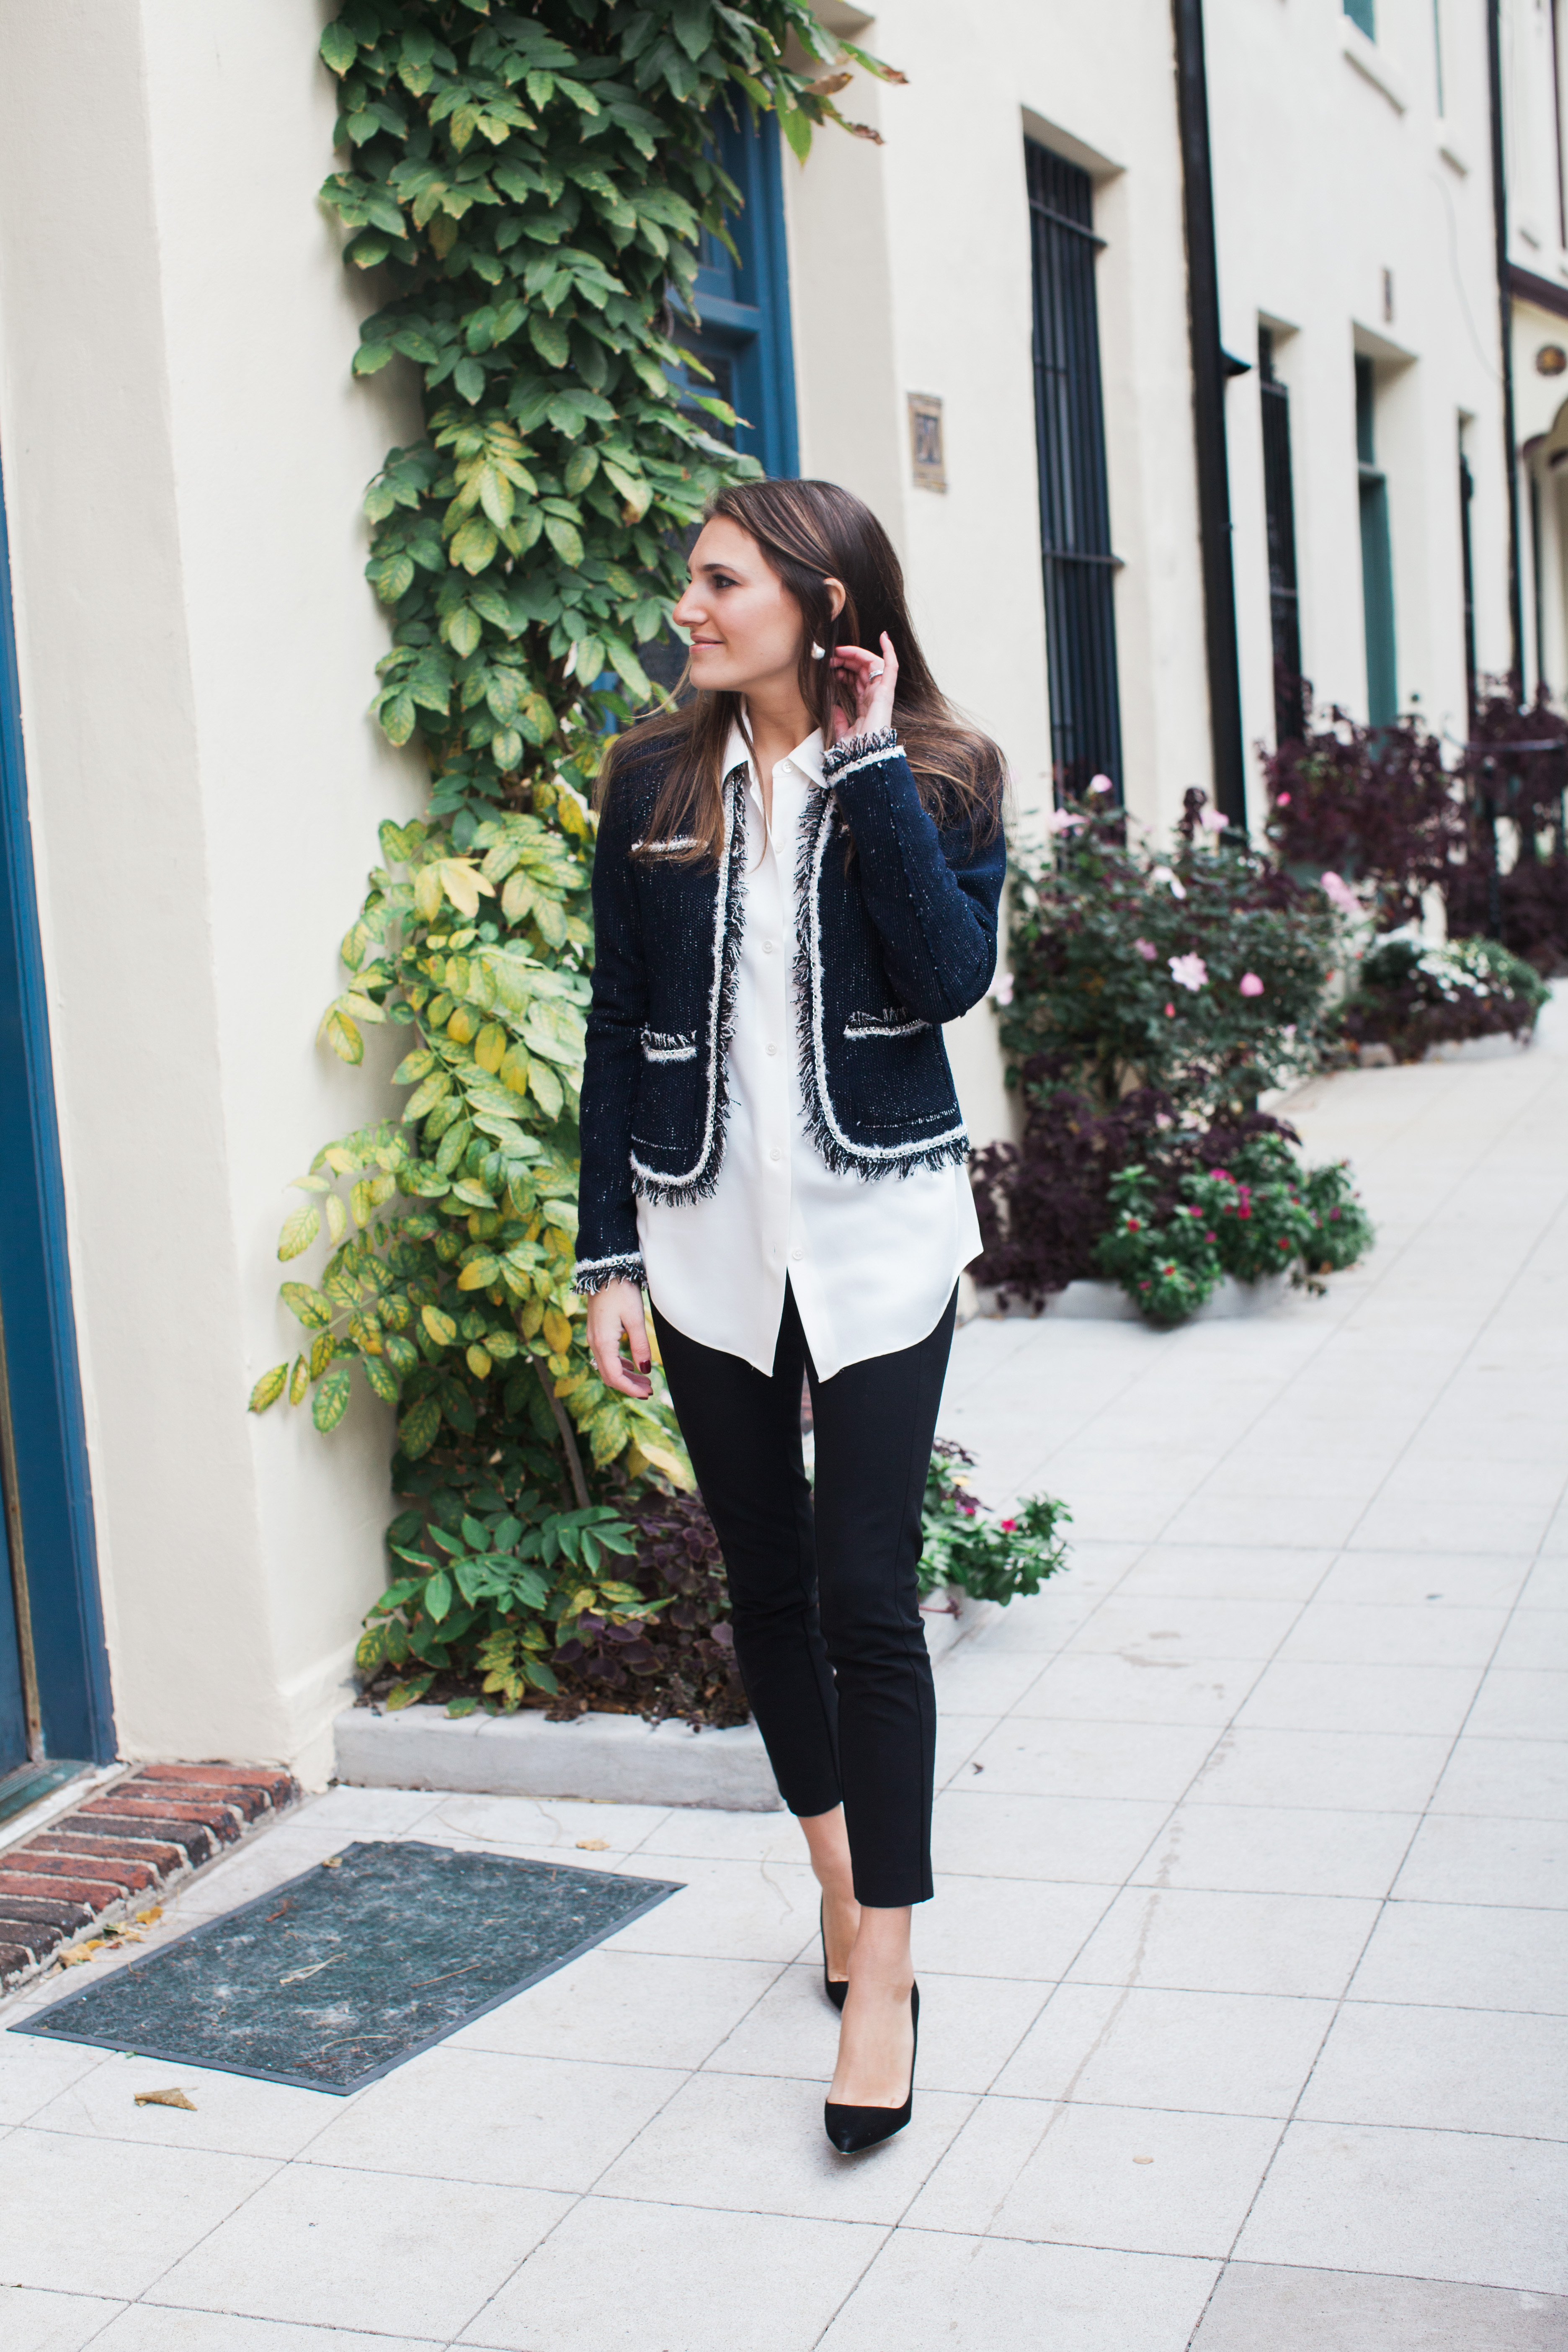 the [almost] Chanel blazer - That Pencil Skirt